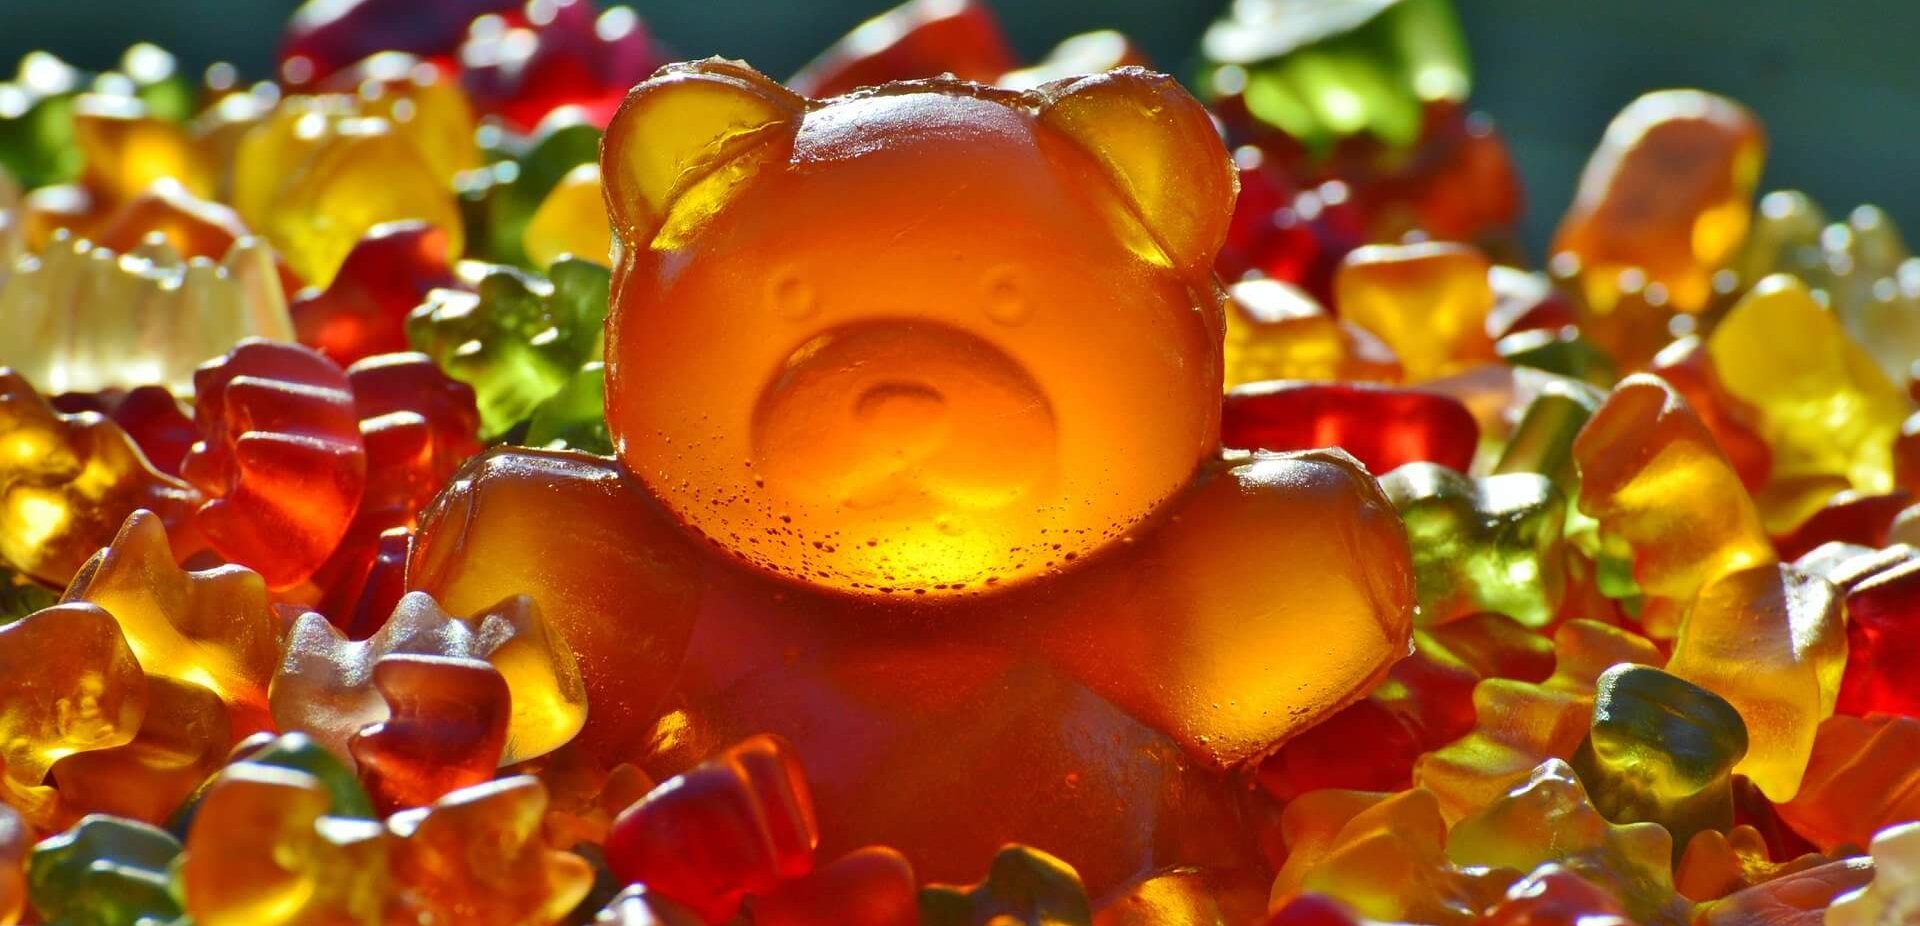 various gummy bears that are packed with sugar.